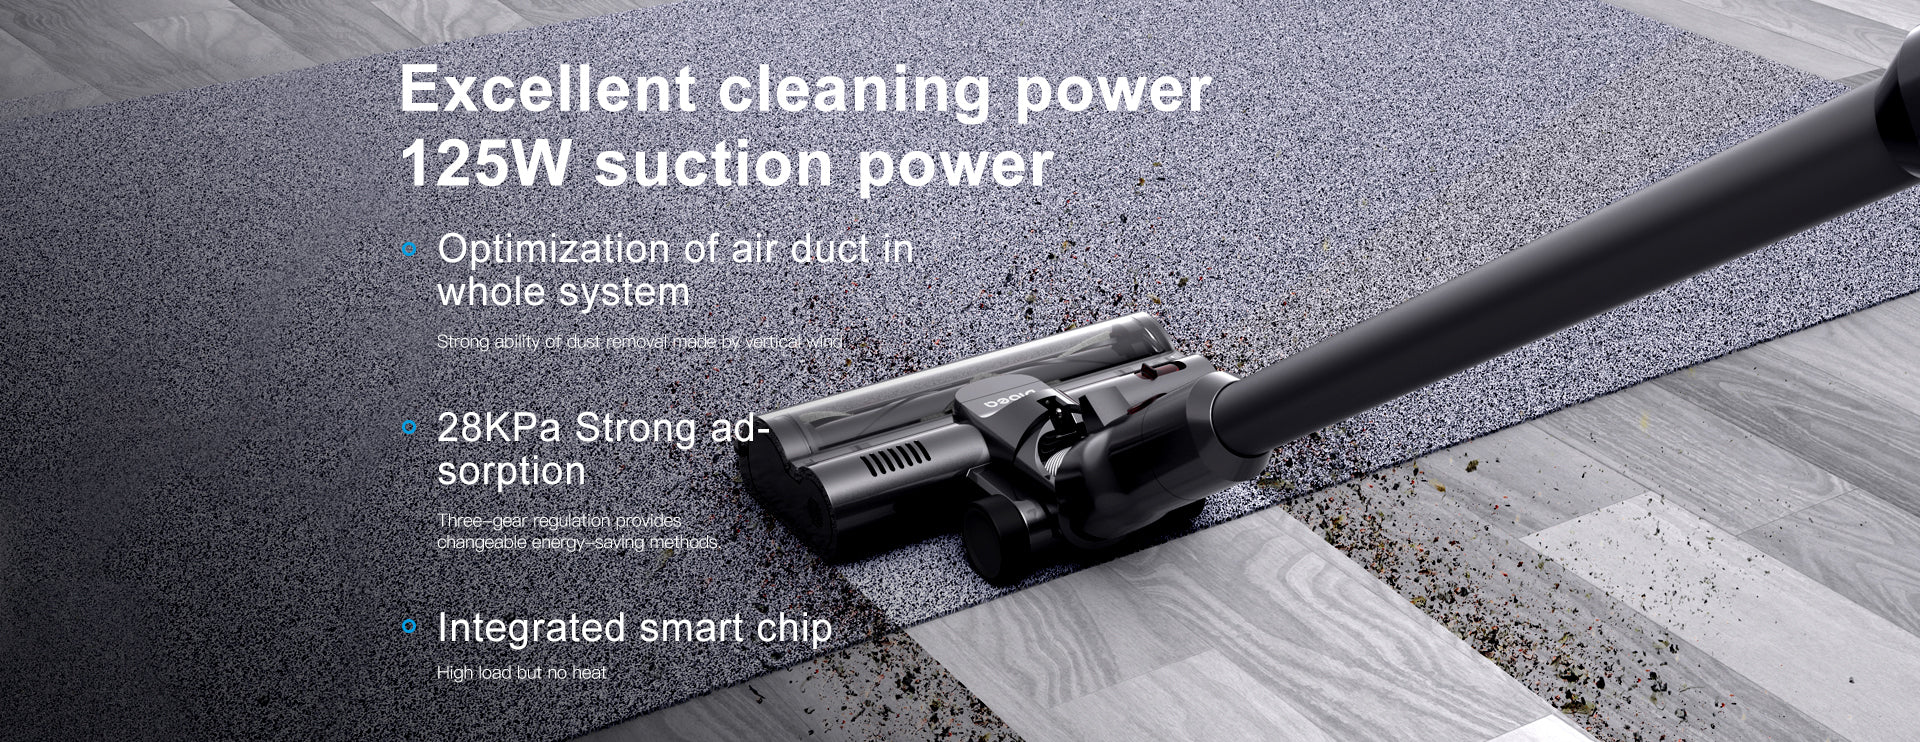 Excellent_cleaning_power125W_suction_power